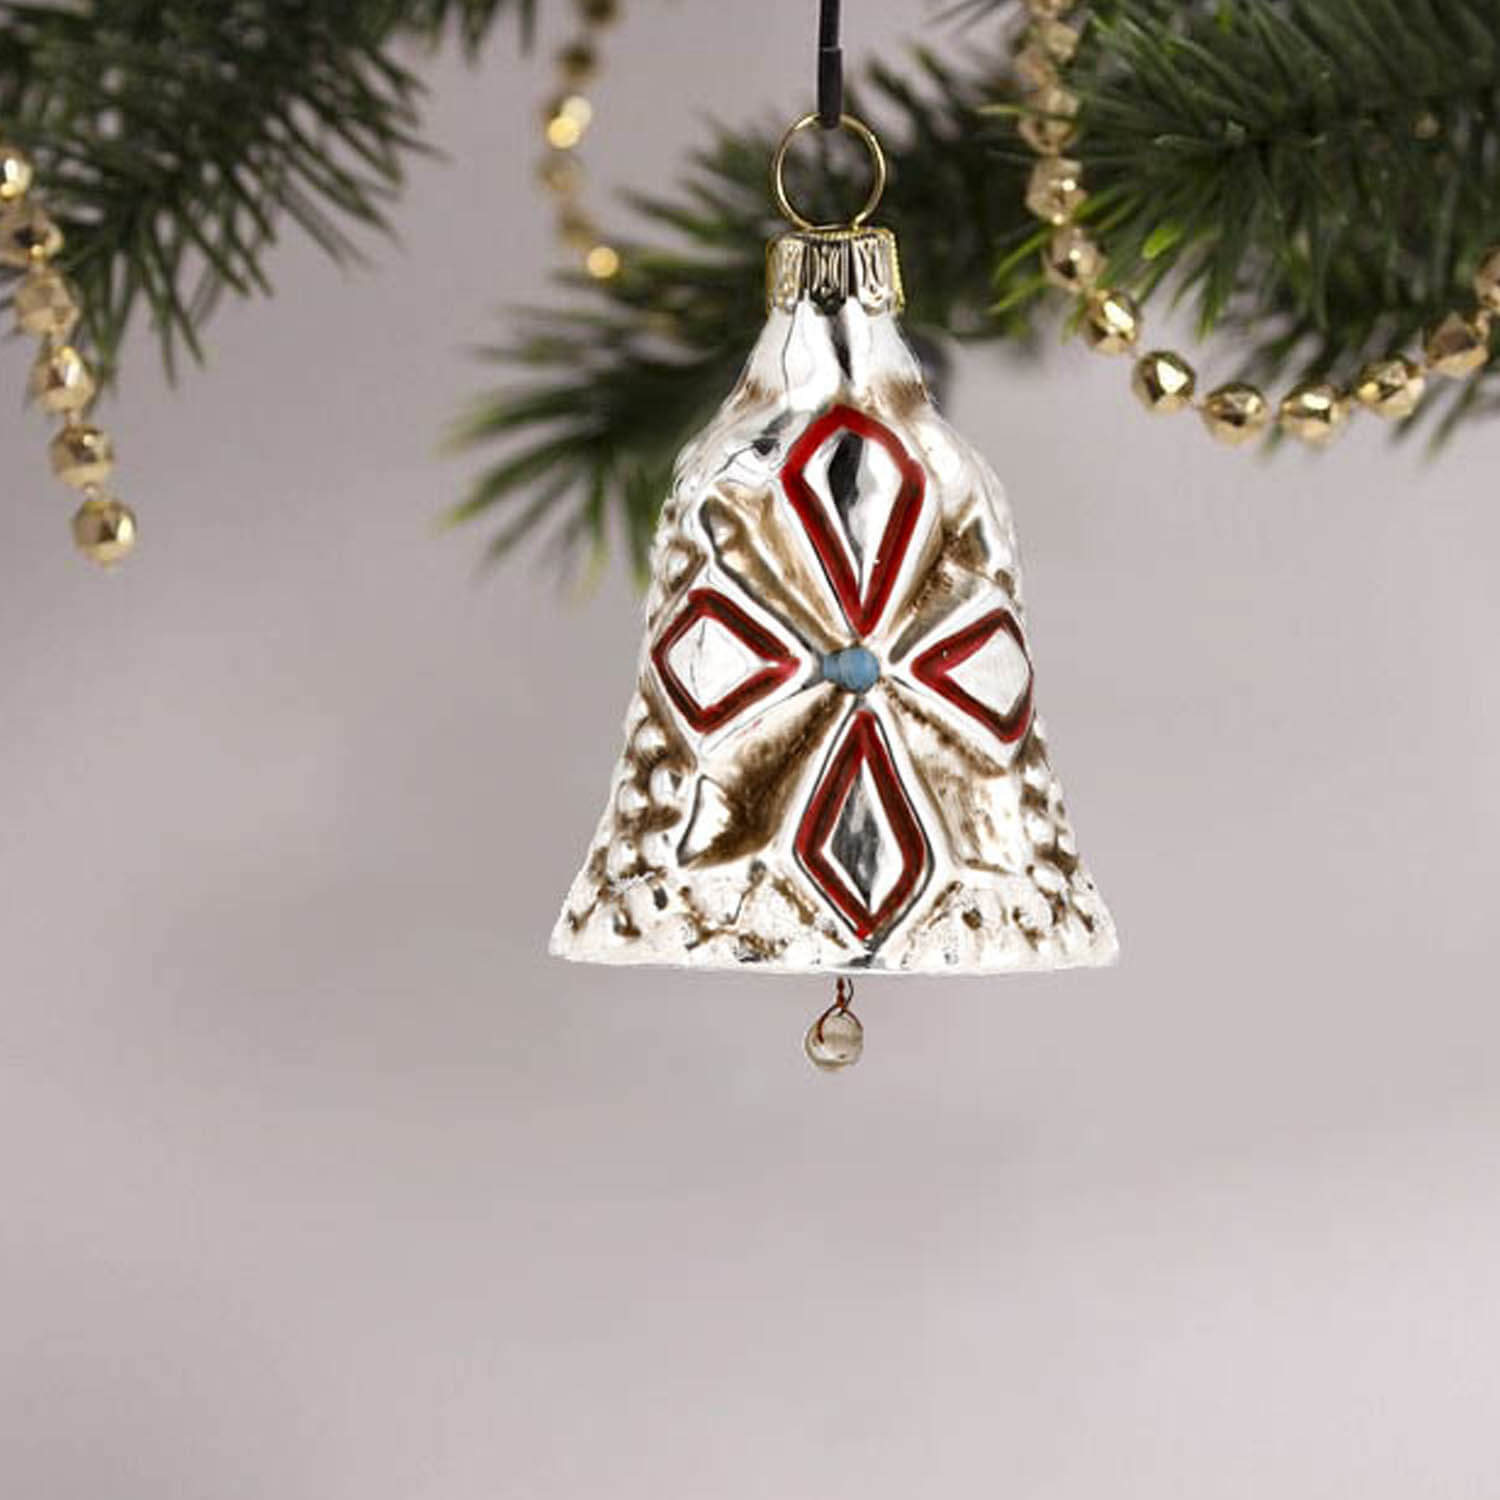 MAROLIN® - Glass ornament "Little red bell with glitter"